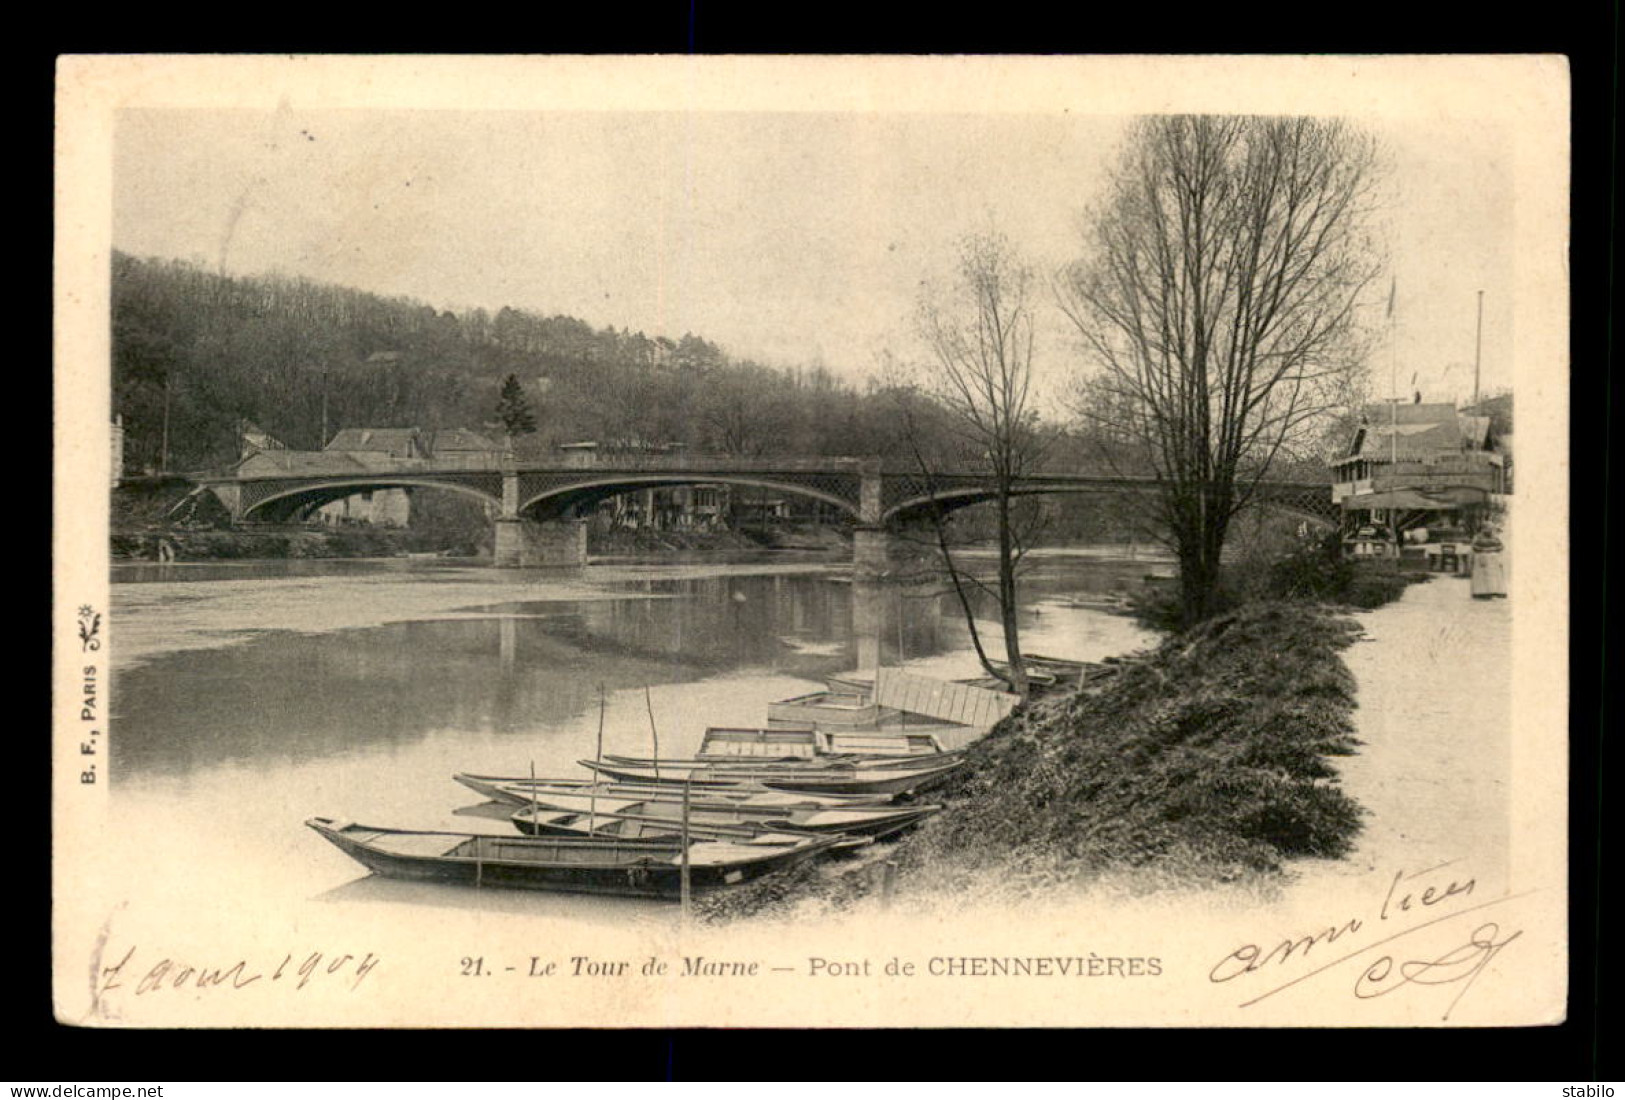 94 - CHENNEVIERES - LE PONT - Chennevieres Sur Marne